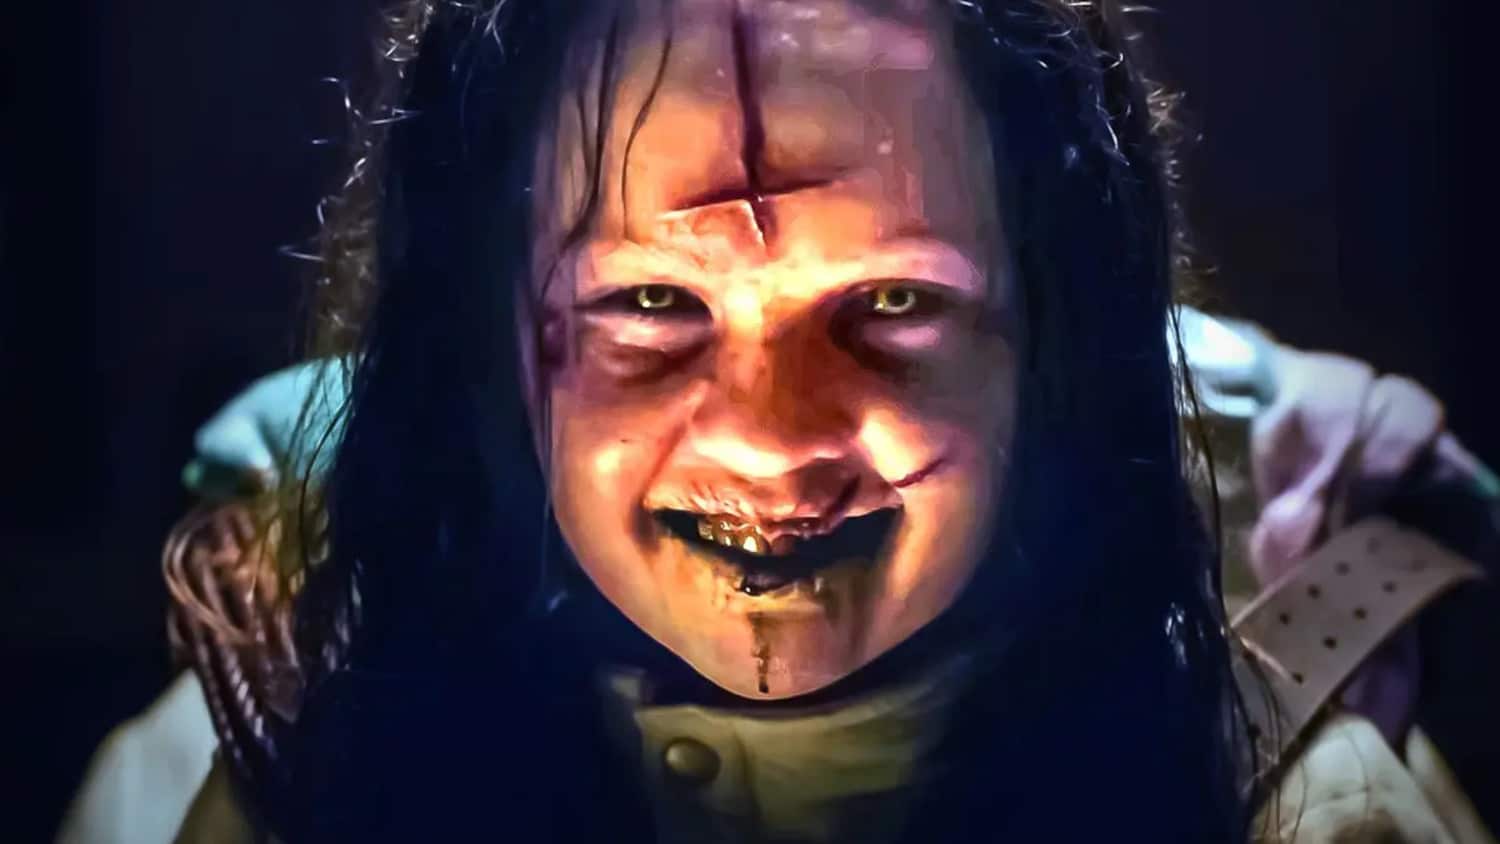 'Exorcist' Sequel Spins Its Head Following 'Believer' Box Office Vomit